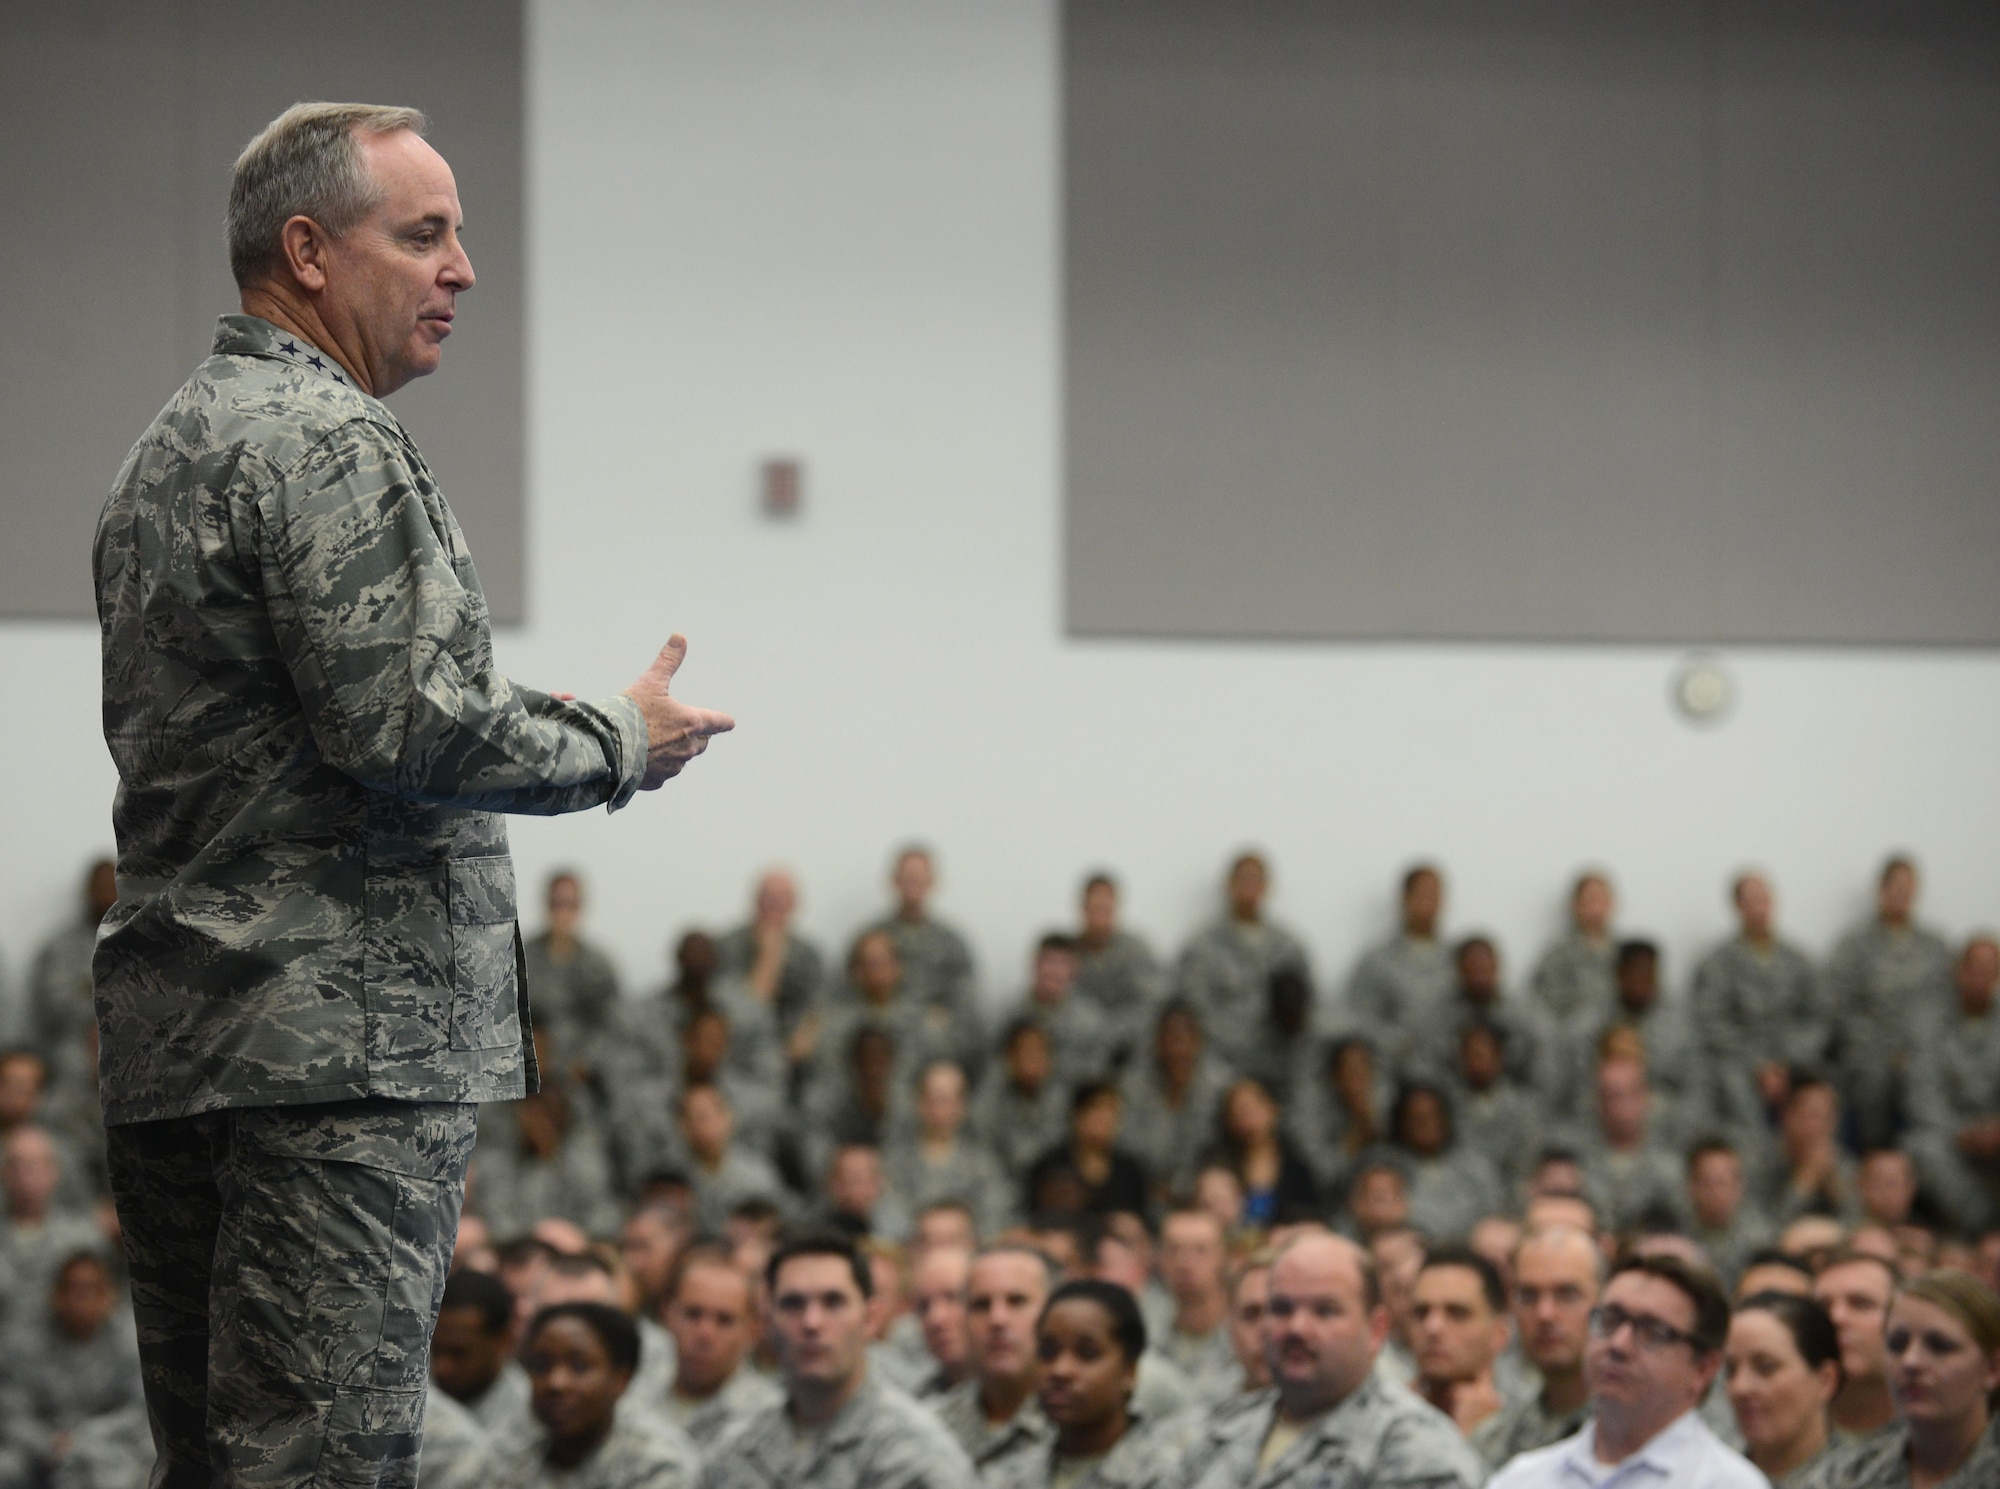 Air Force Chief of Staff Gen. Mark A. Welsh III speaks at an all call during his visit Jan. 21, 2016, at Andersen Air Force Base, Guam. Welsh spoke about matters pertaining to the Air Force and shared personal stories about himself and his service. (U.S. Air Force photo/Airman 1st Class Arielle Vasquez)